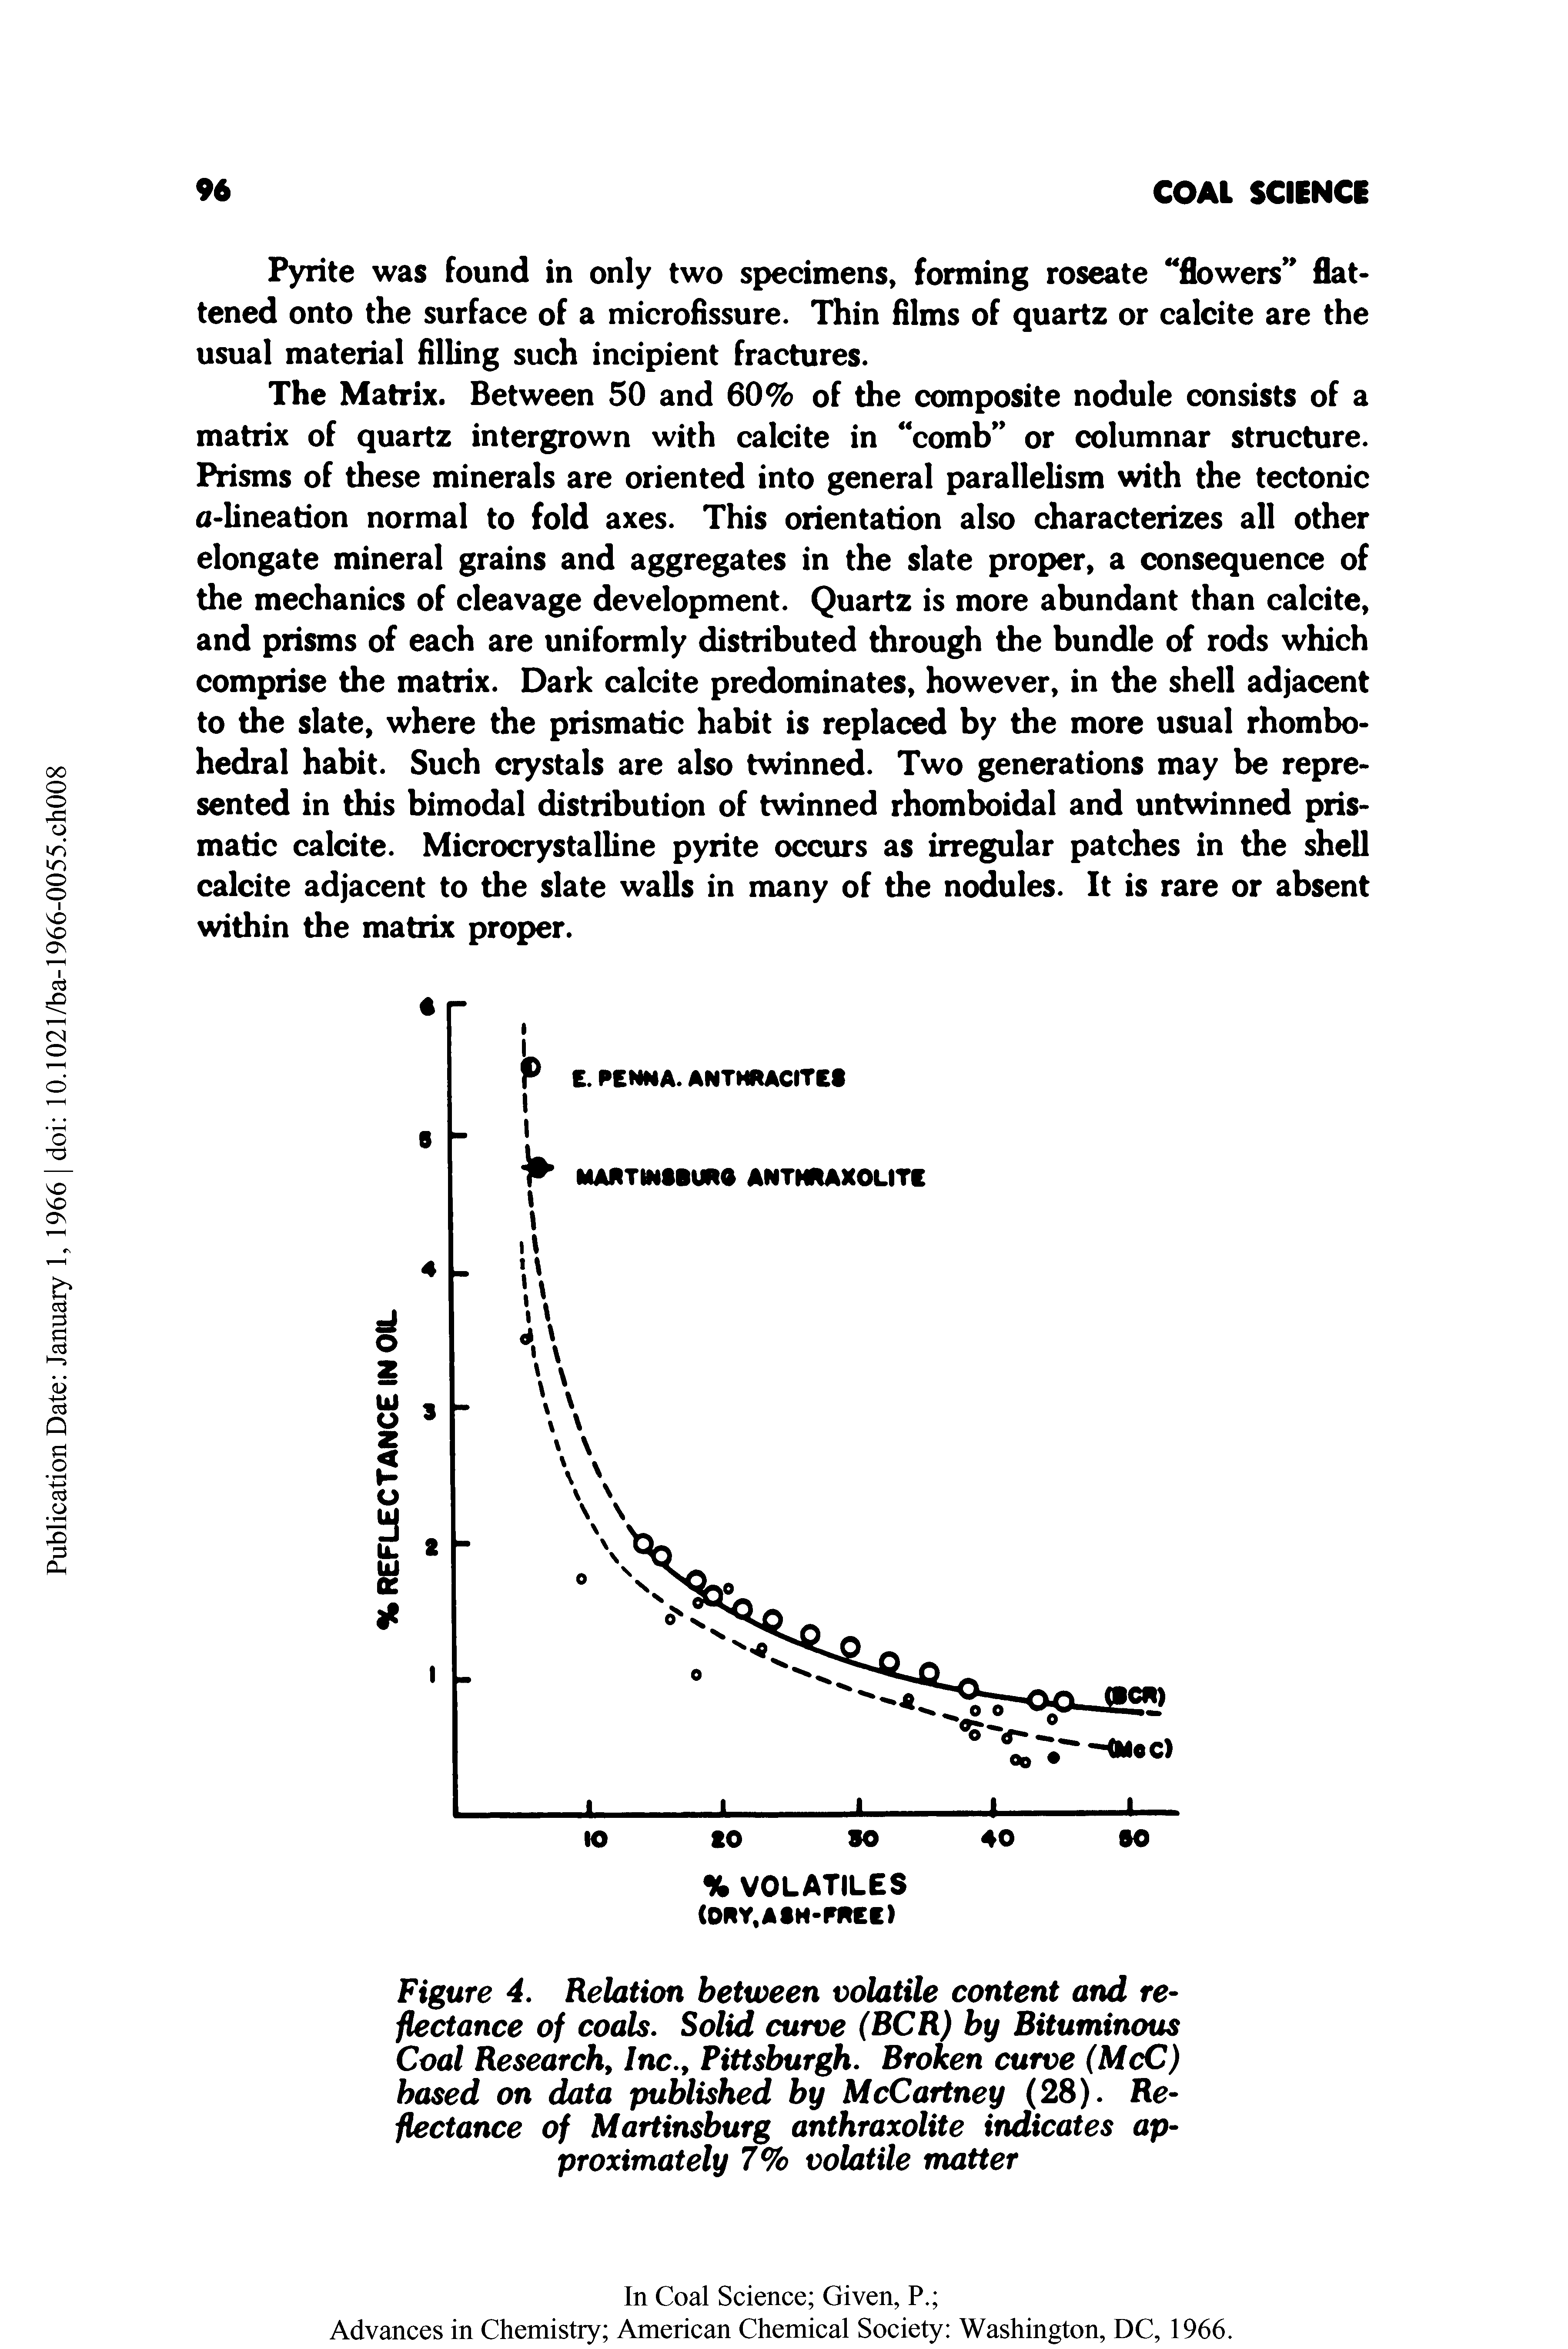 Figure 4. Relation between volatile content and reflectance of coals. Solid curve (BCR) by Bituminous Coal Research, Inc., Pittsburgh. Broken curve (McC) based on data published by McCartney (28). Reflectance of Martinsburg anthraxolite indicates approximately 7% volatile matter...